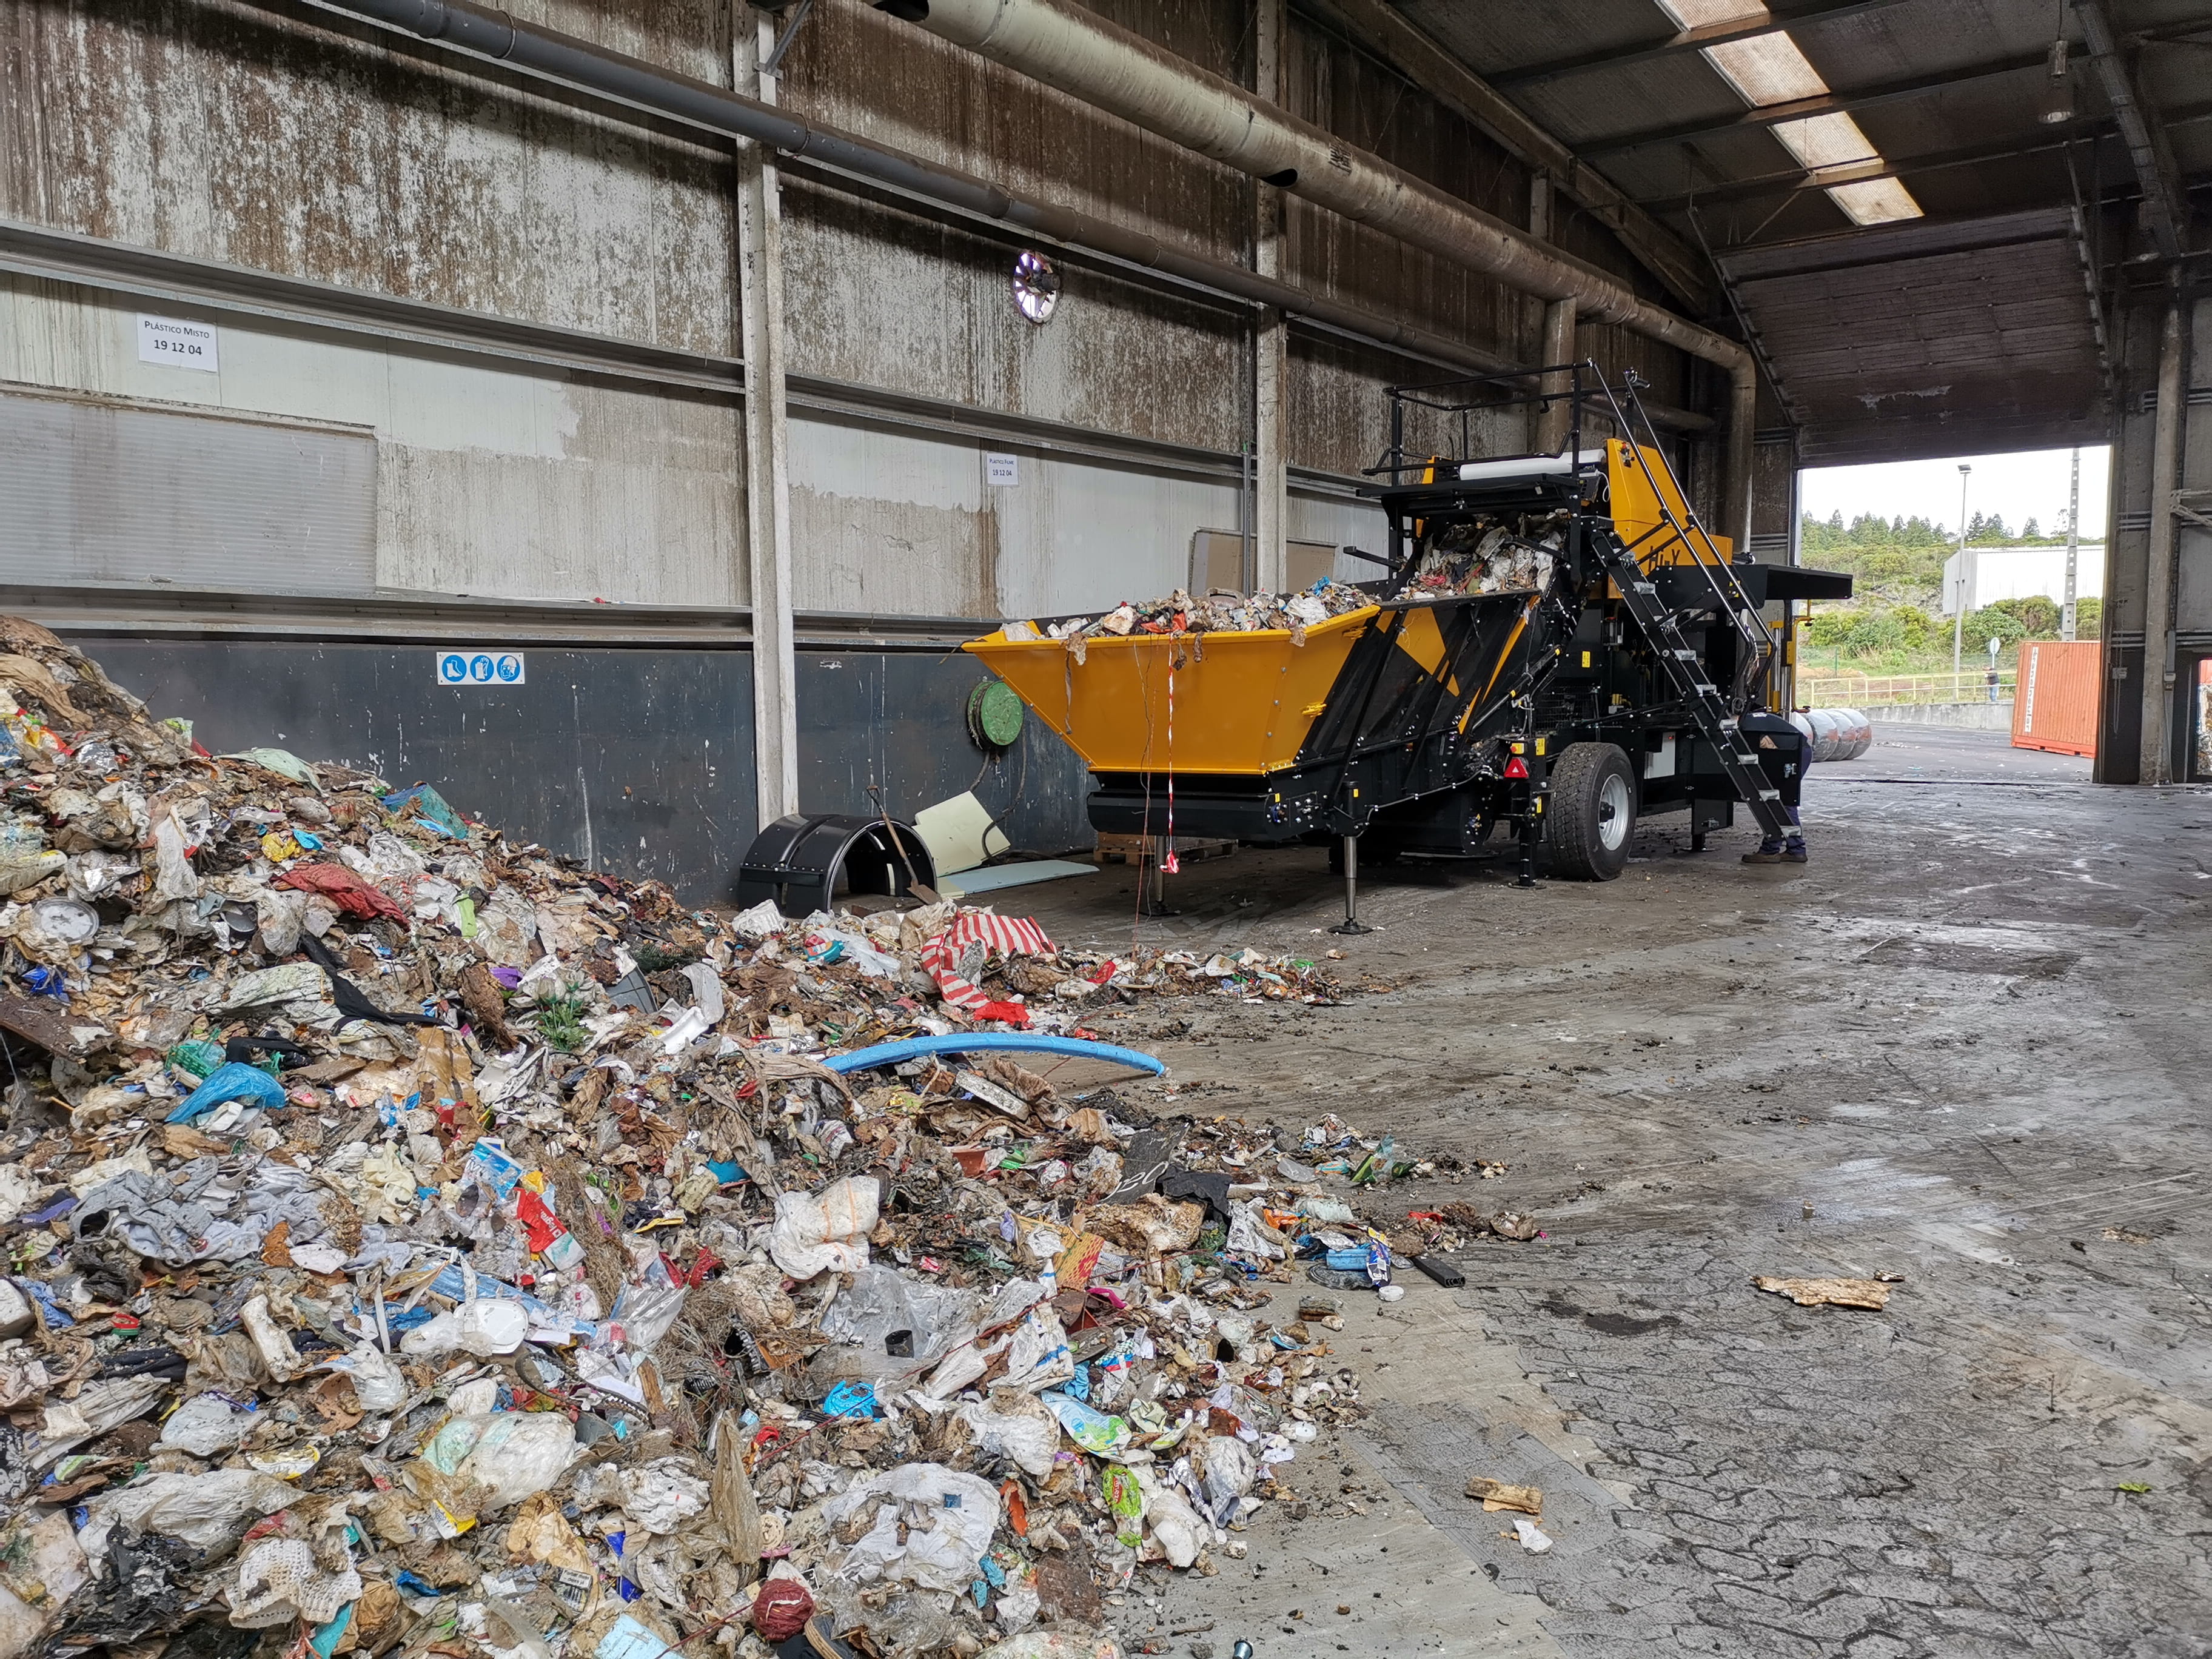 A Hi-X compactor in a concrete facility, with loose landfill waste in its feeding table and heaps of loose waste in the foreground.